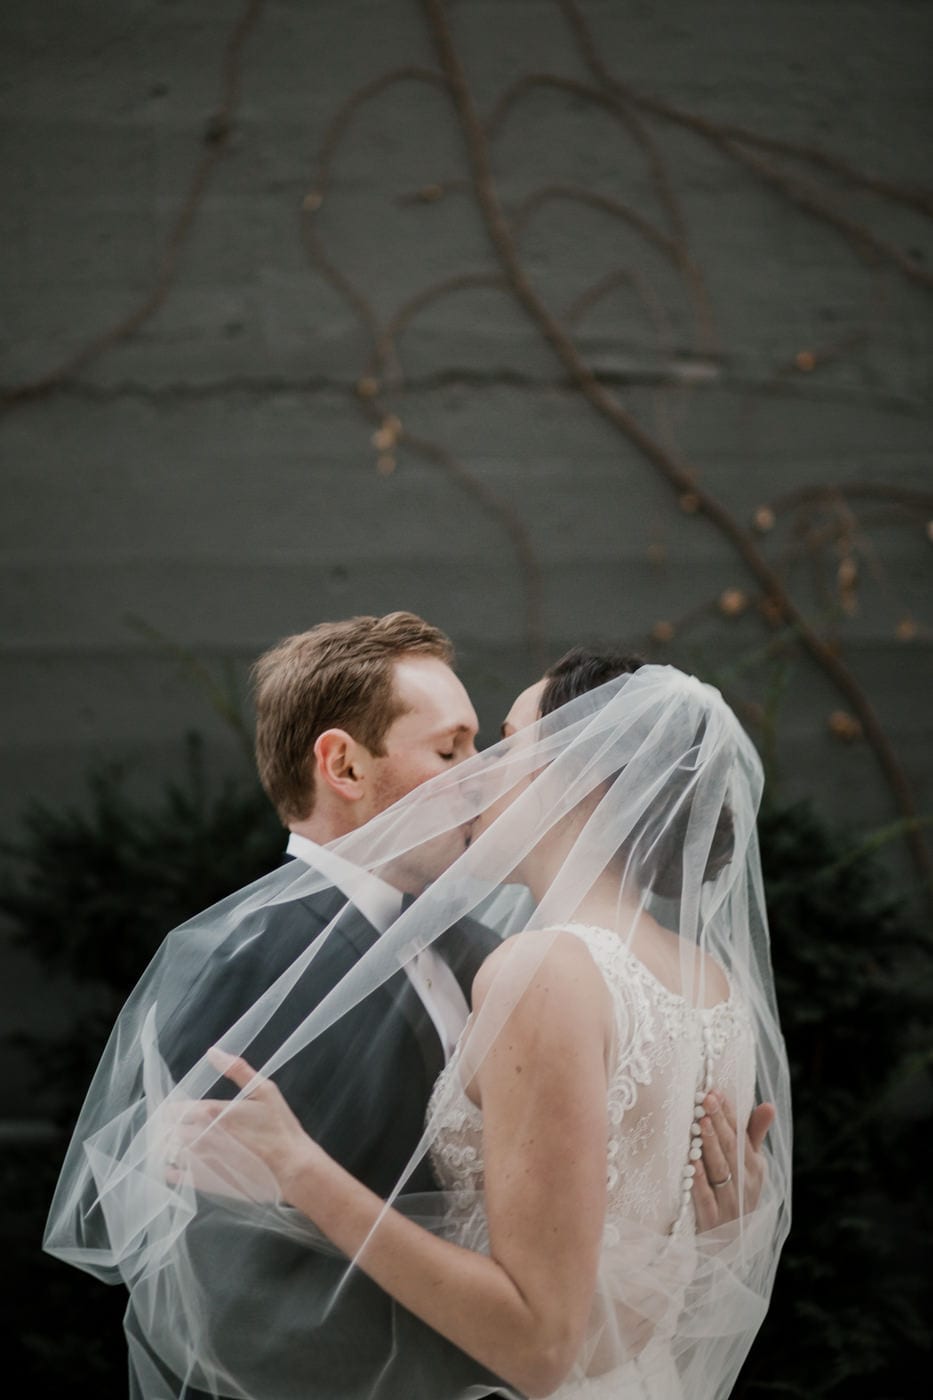 bride and groom kiss while bride's veil blows in wind at black tie winter wedding